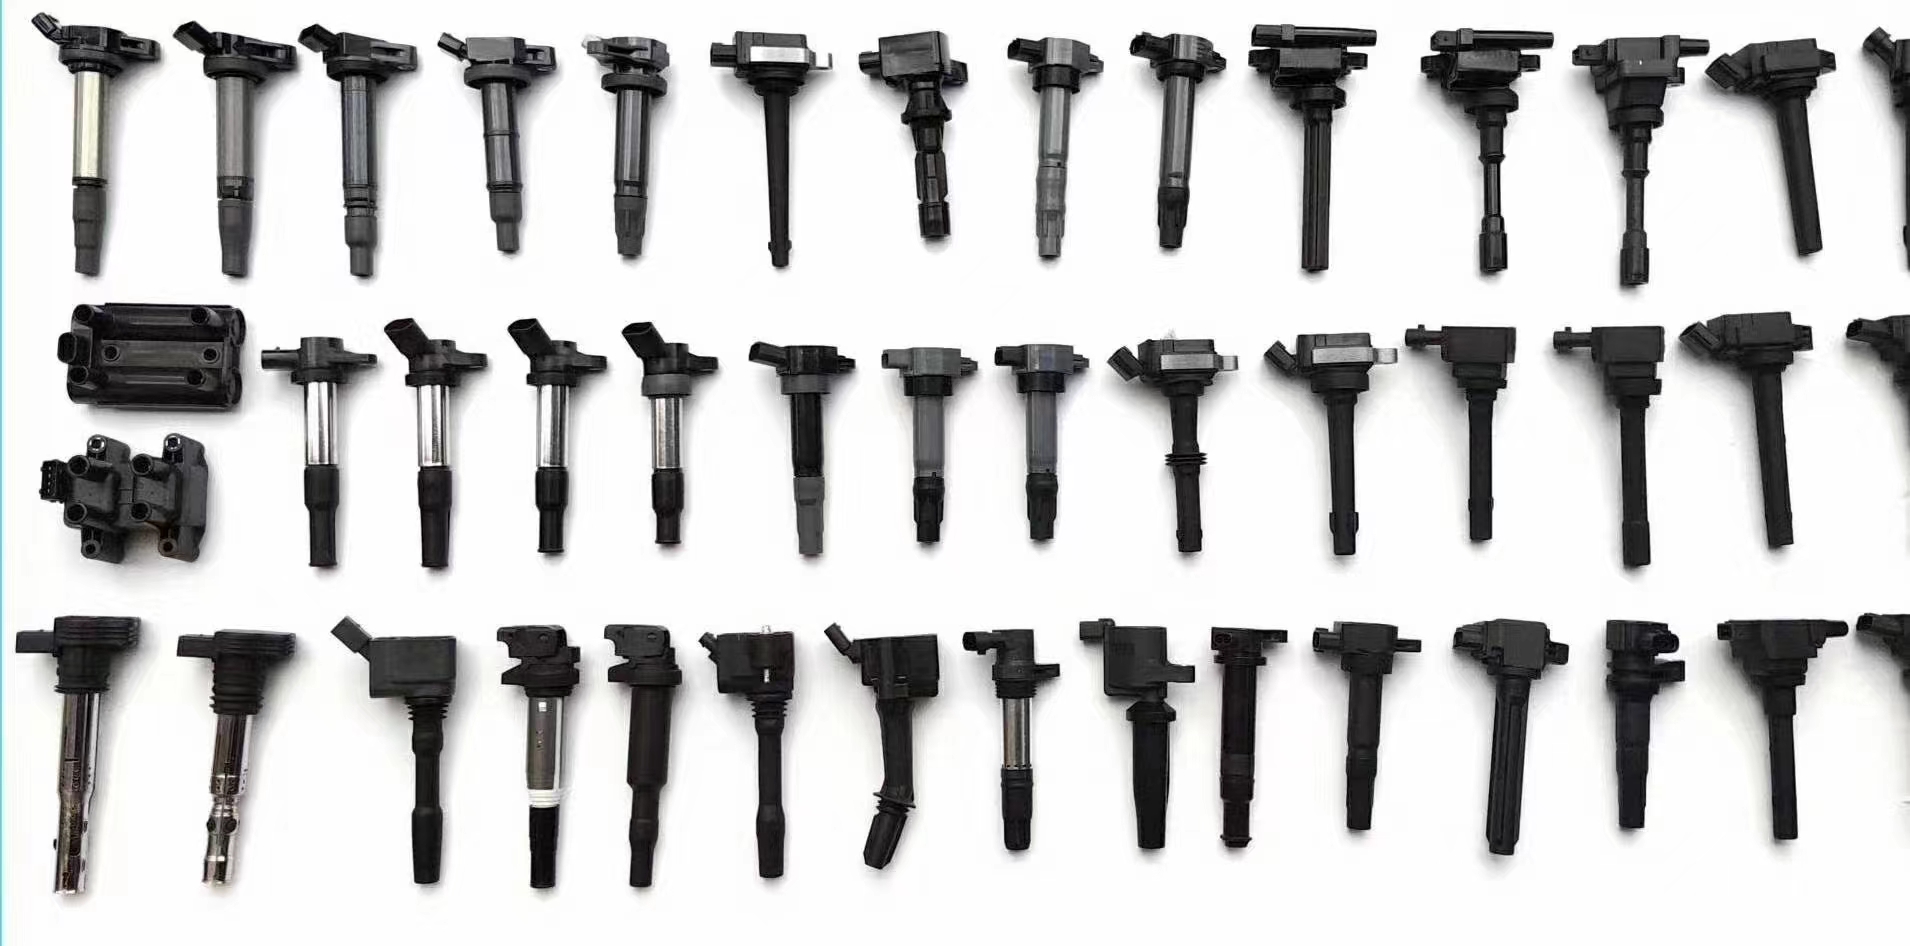 Mapms Ignition Coils